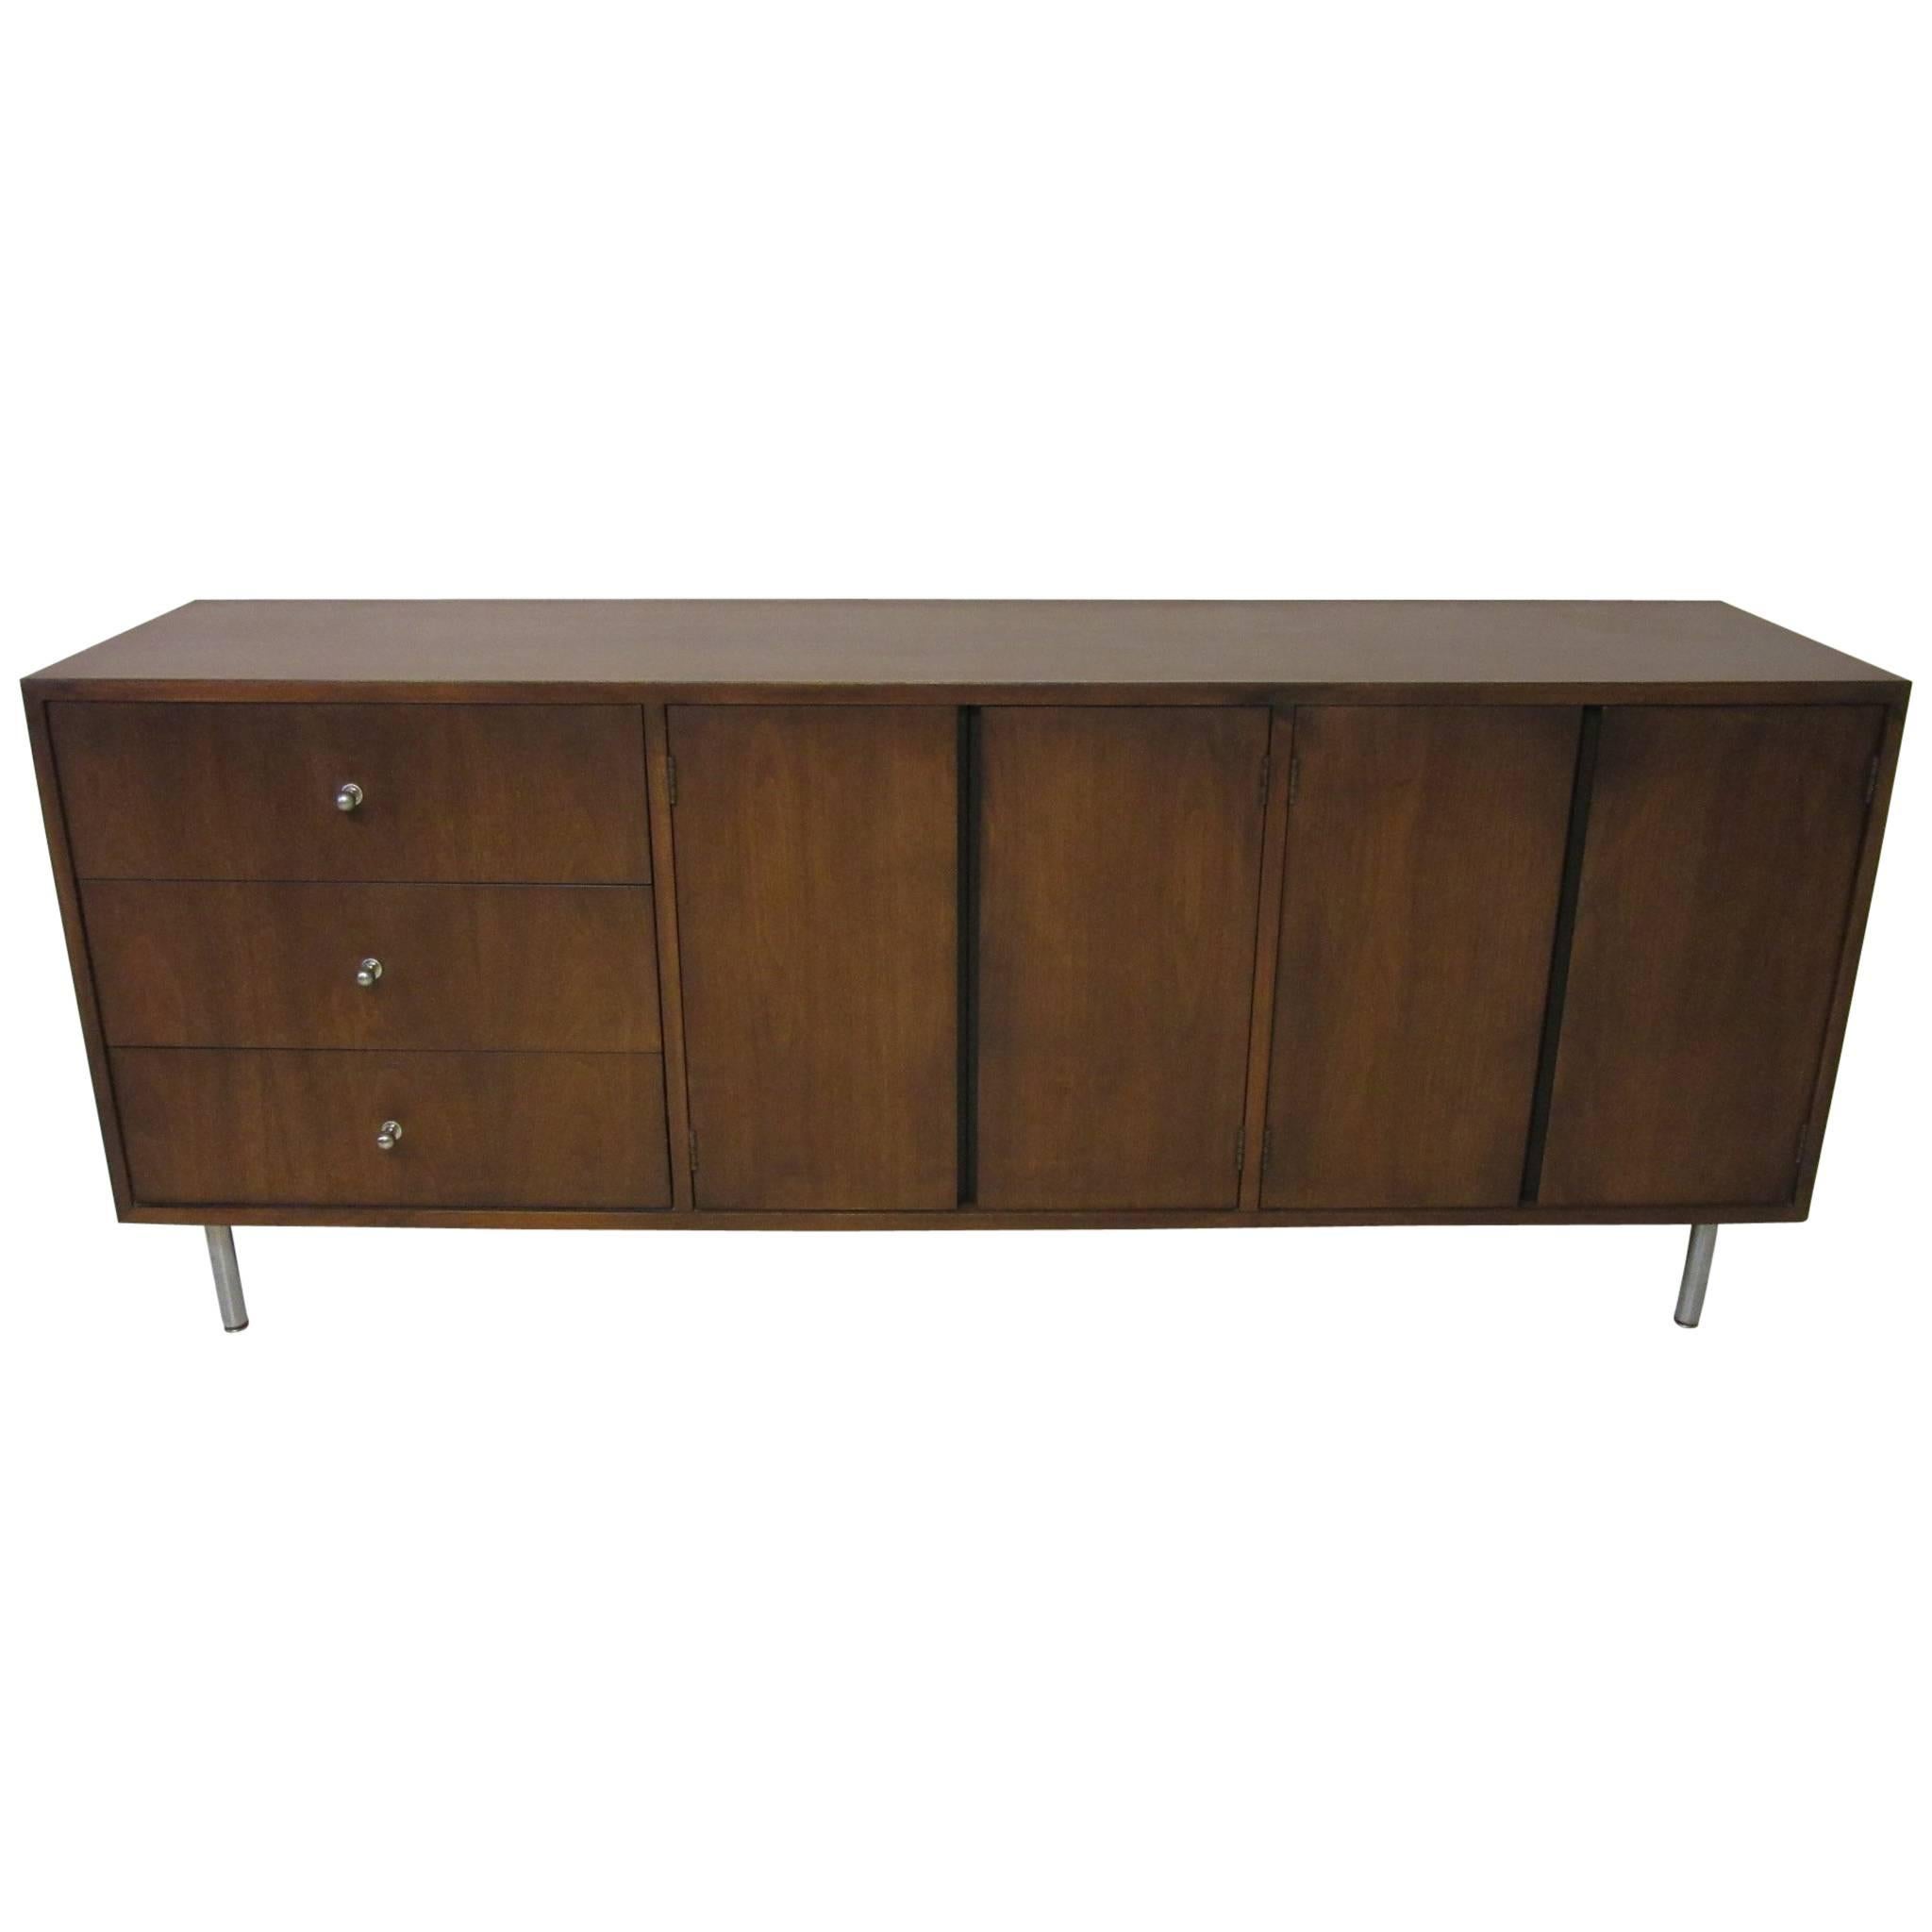 Midcentury Walnut Credenza in the Style of George Nelson